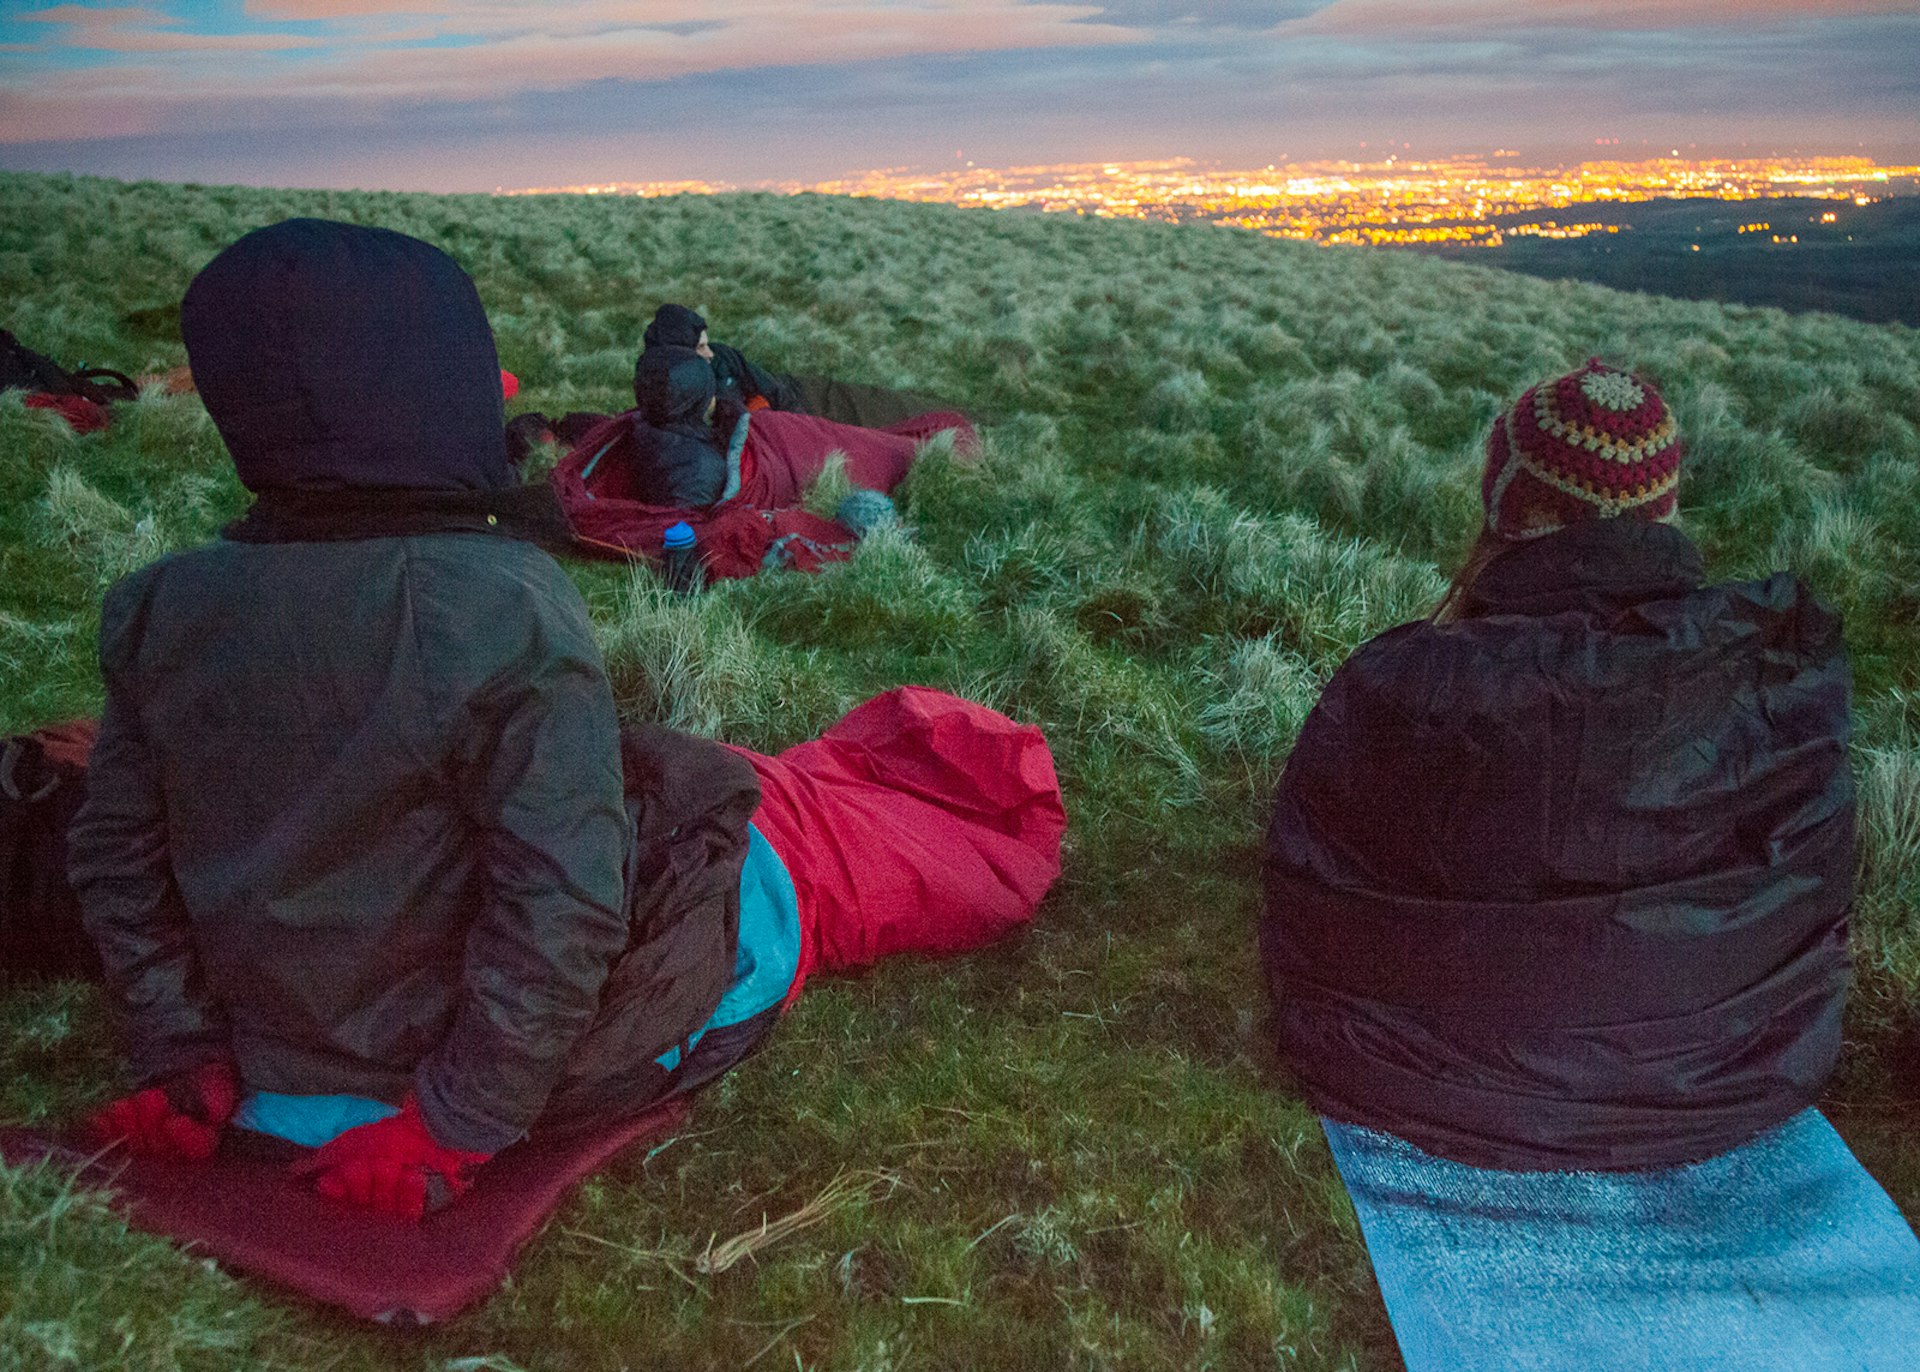 Alastair Humphreys and others wake up to watch dusk fall as they prepare to sleep on a hill © Alastair Humphreys